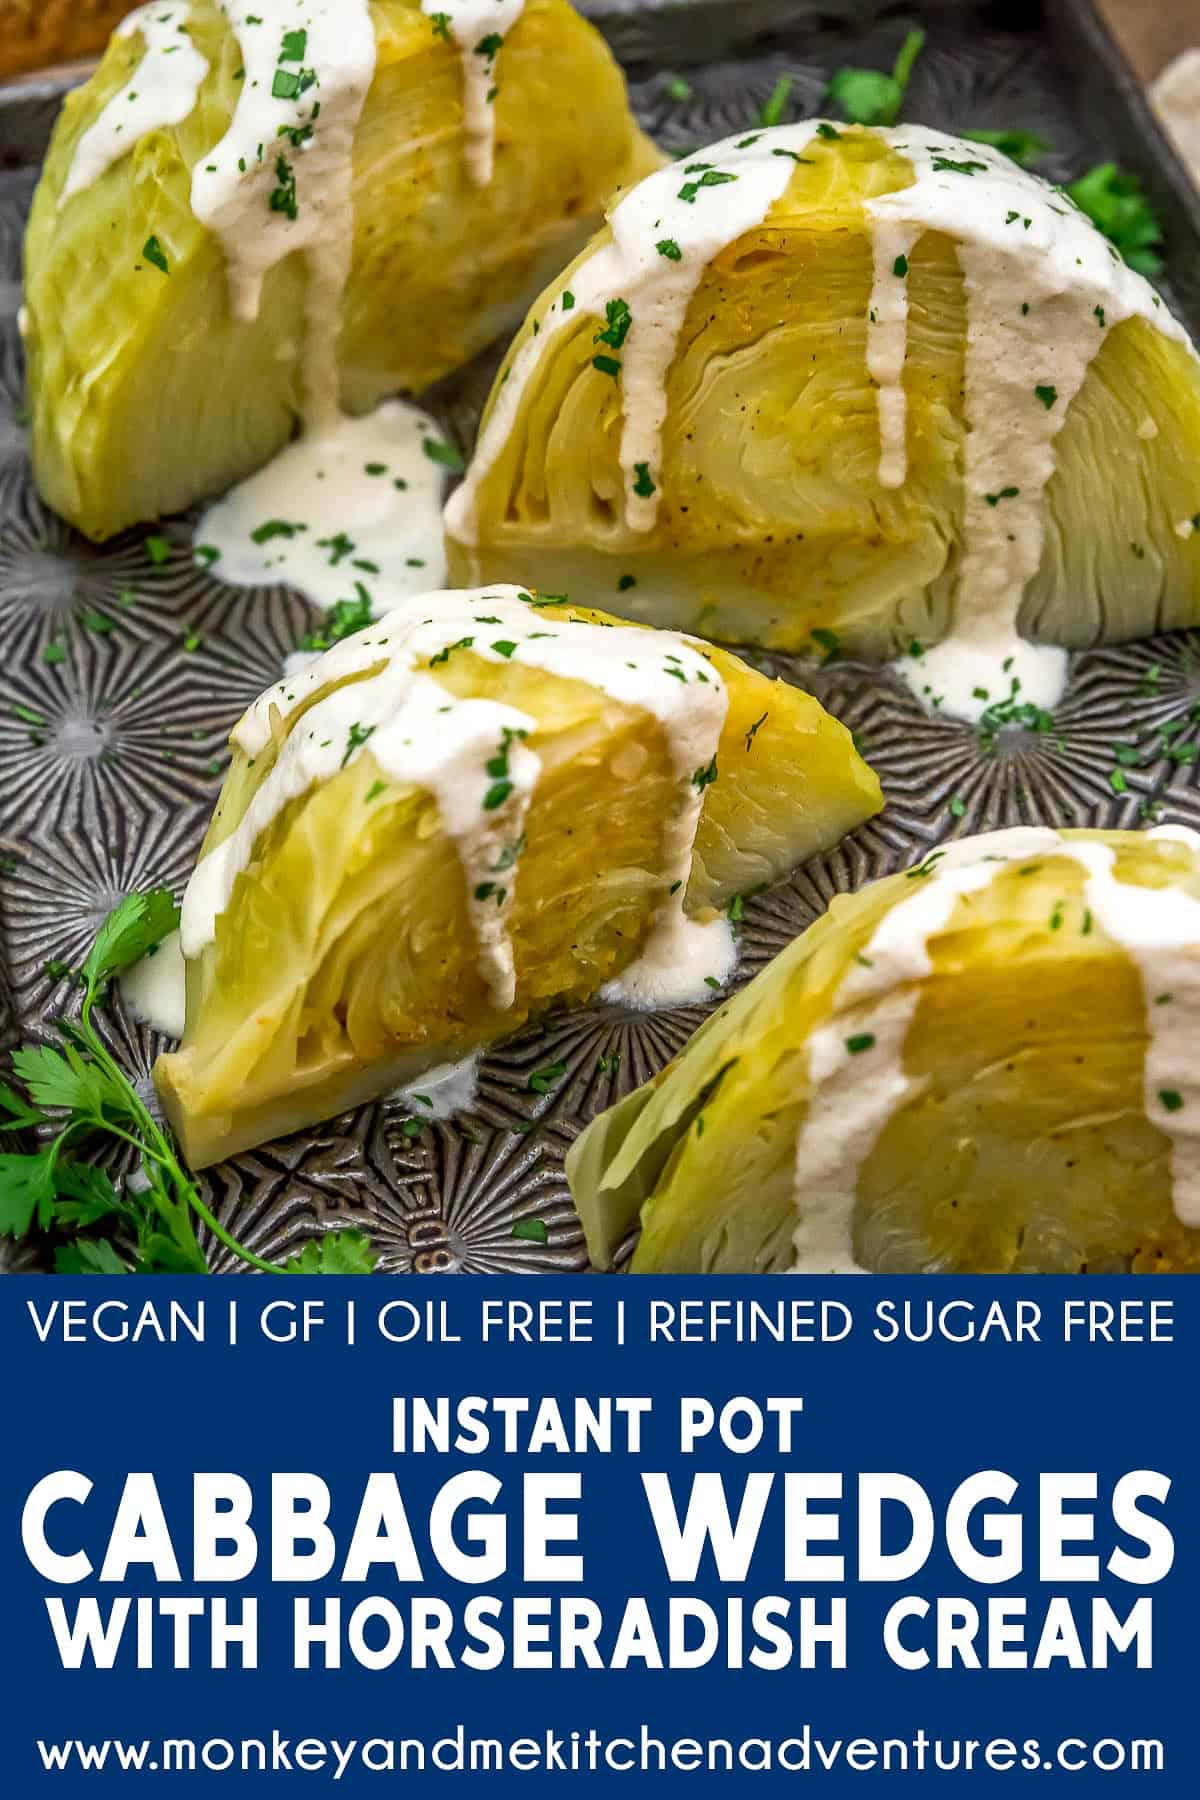 Instant Pot Cabbage Wedges with Horseradish Cream with text description